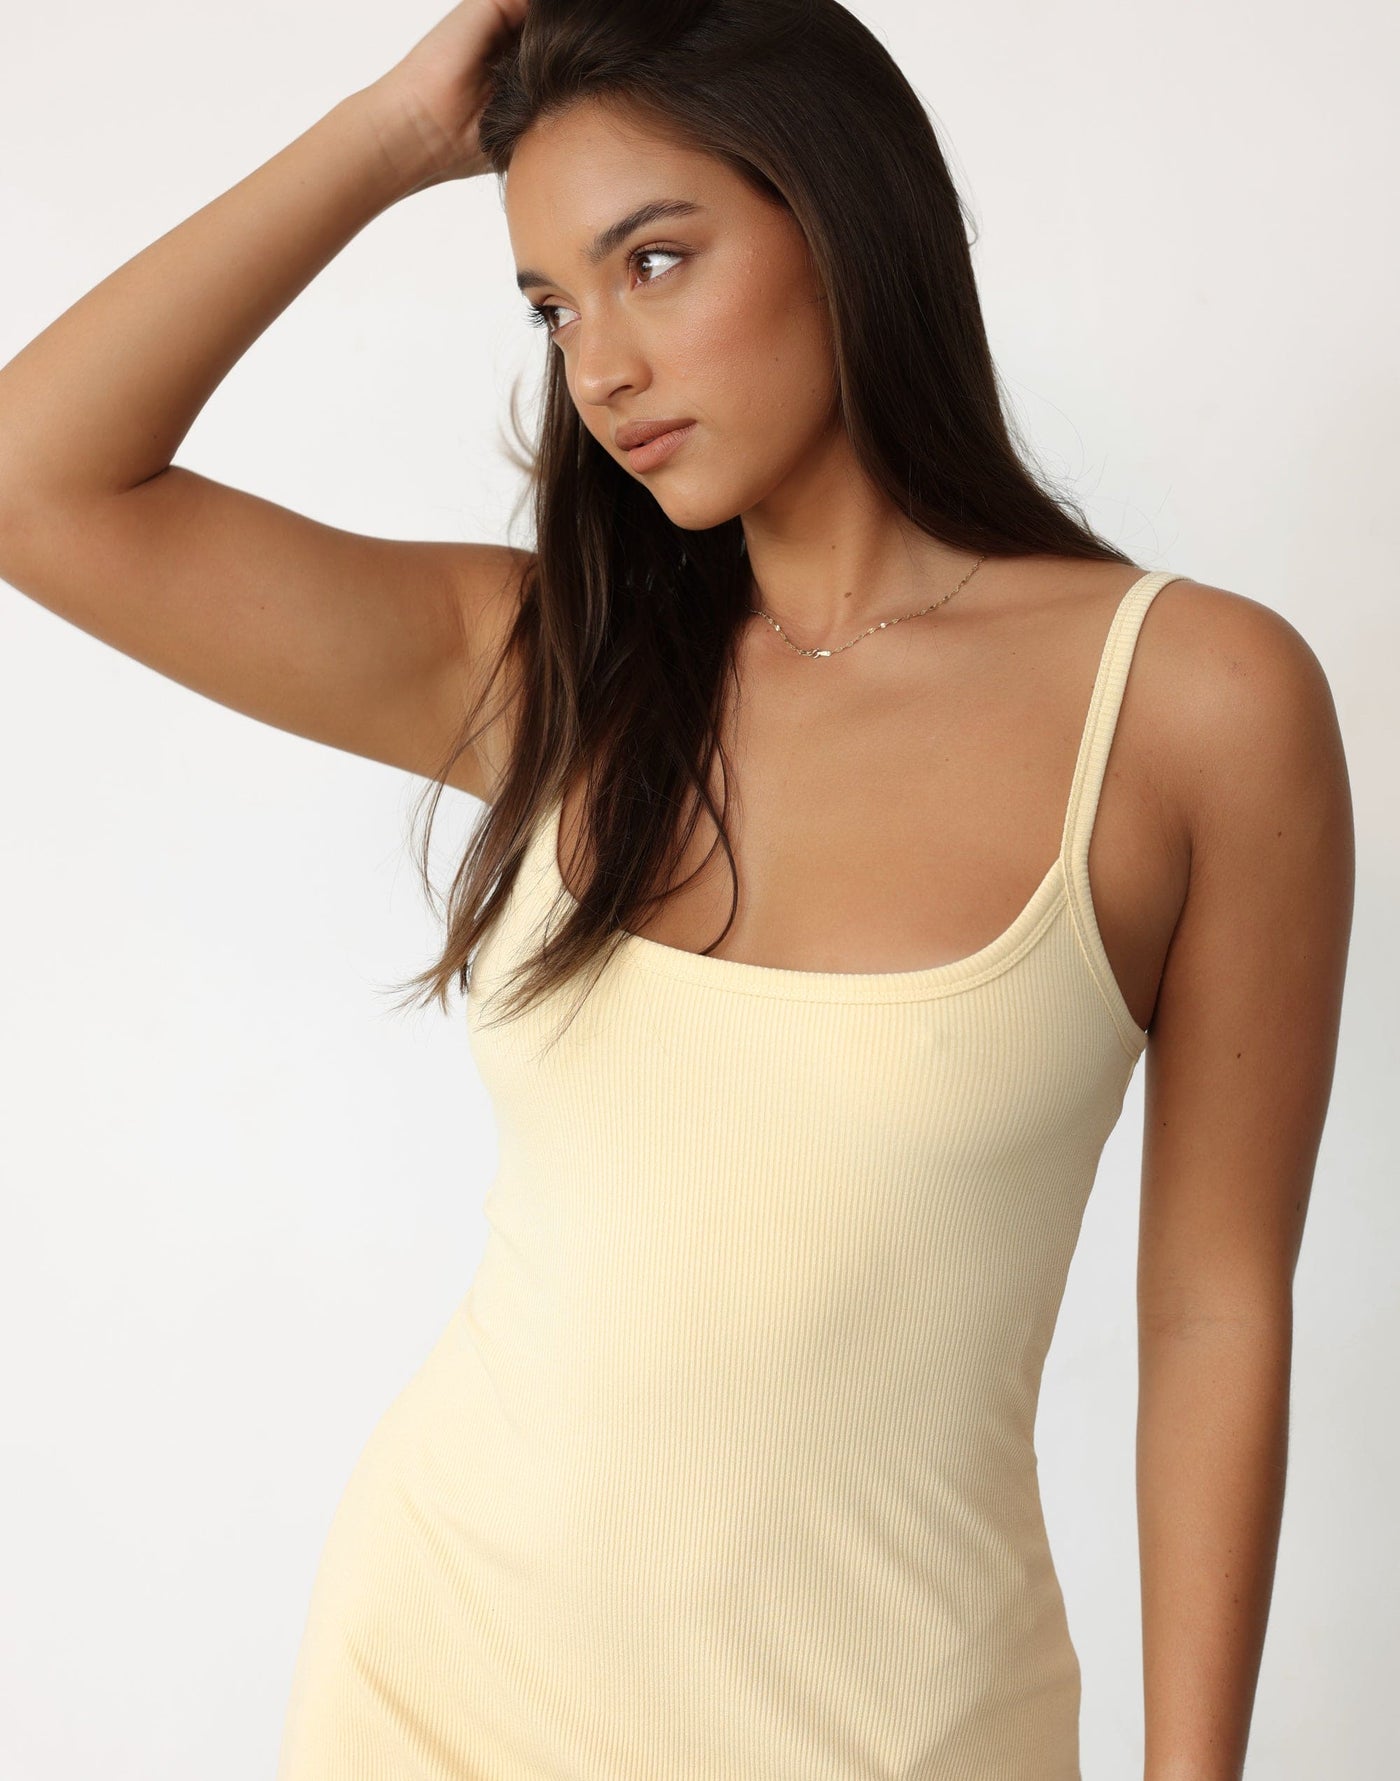 Helia Mini Dress (Lemon) | Charcoal Clothing Exclusive - Ribbed Lined Scoop Neck Mini Dress - Women's Top - Charcoal Clothing